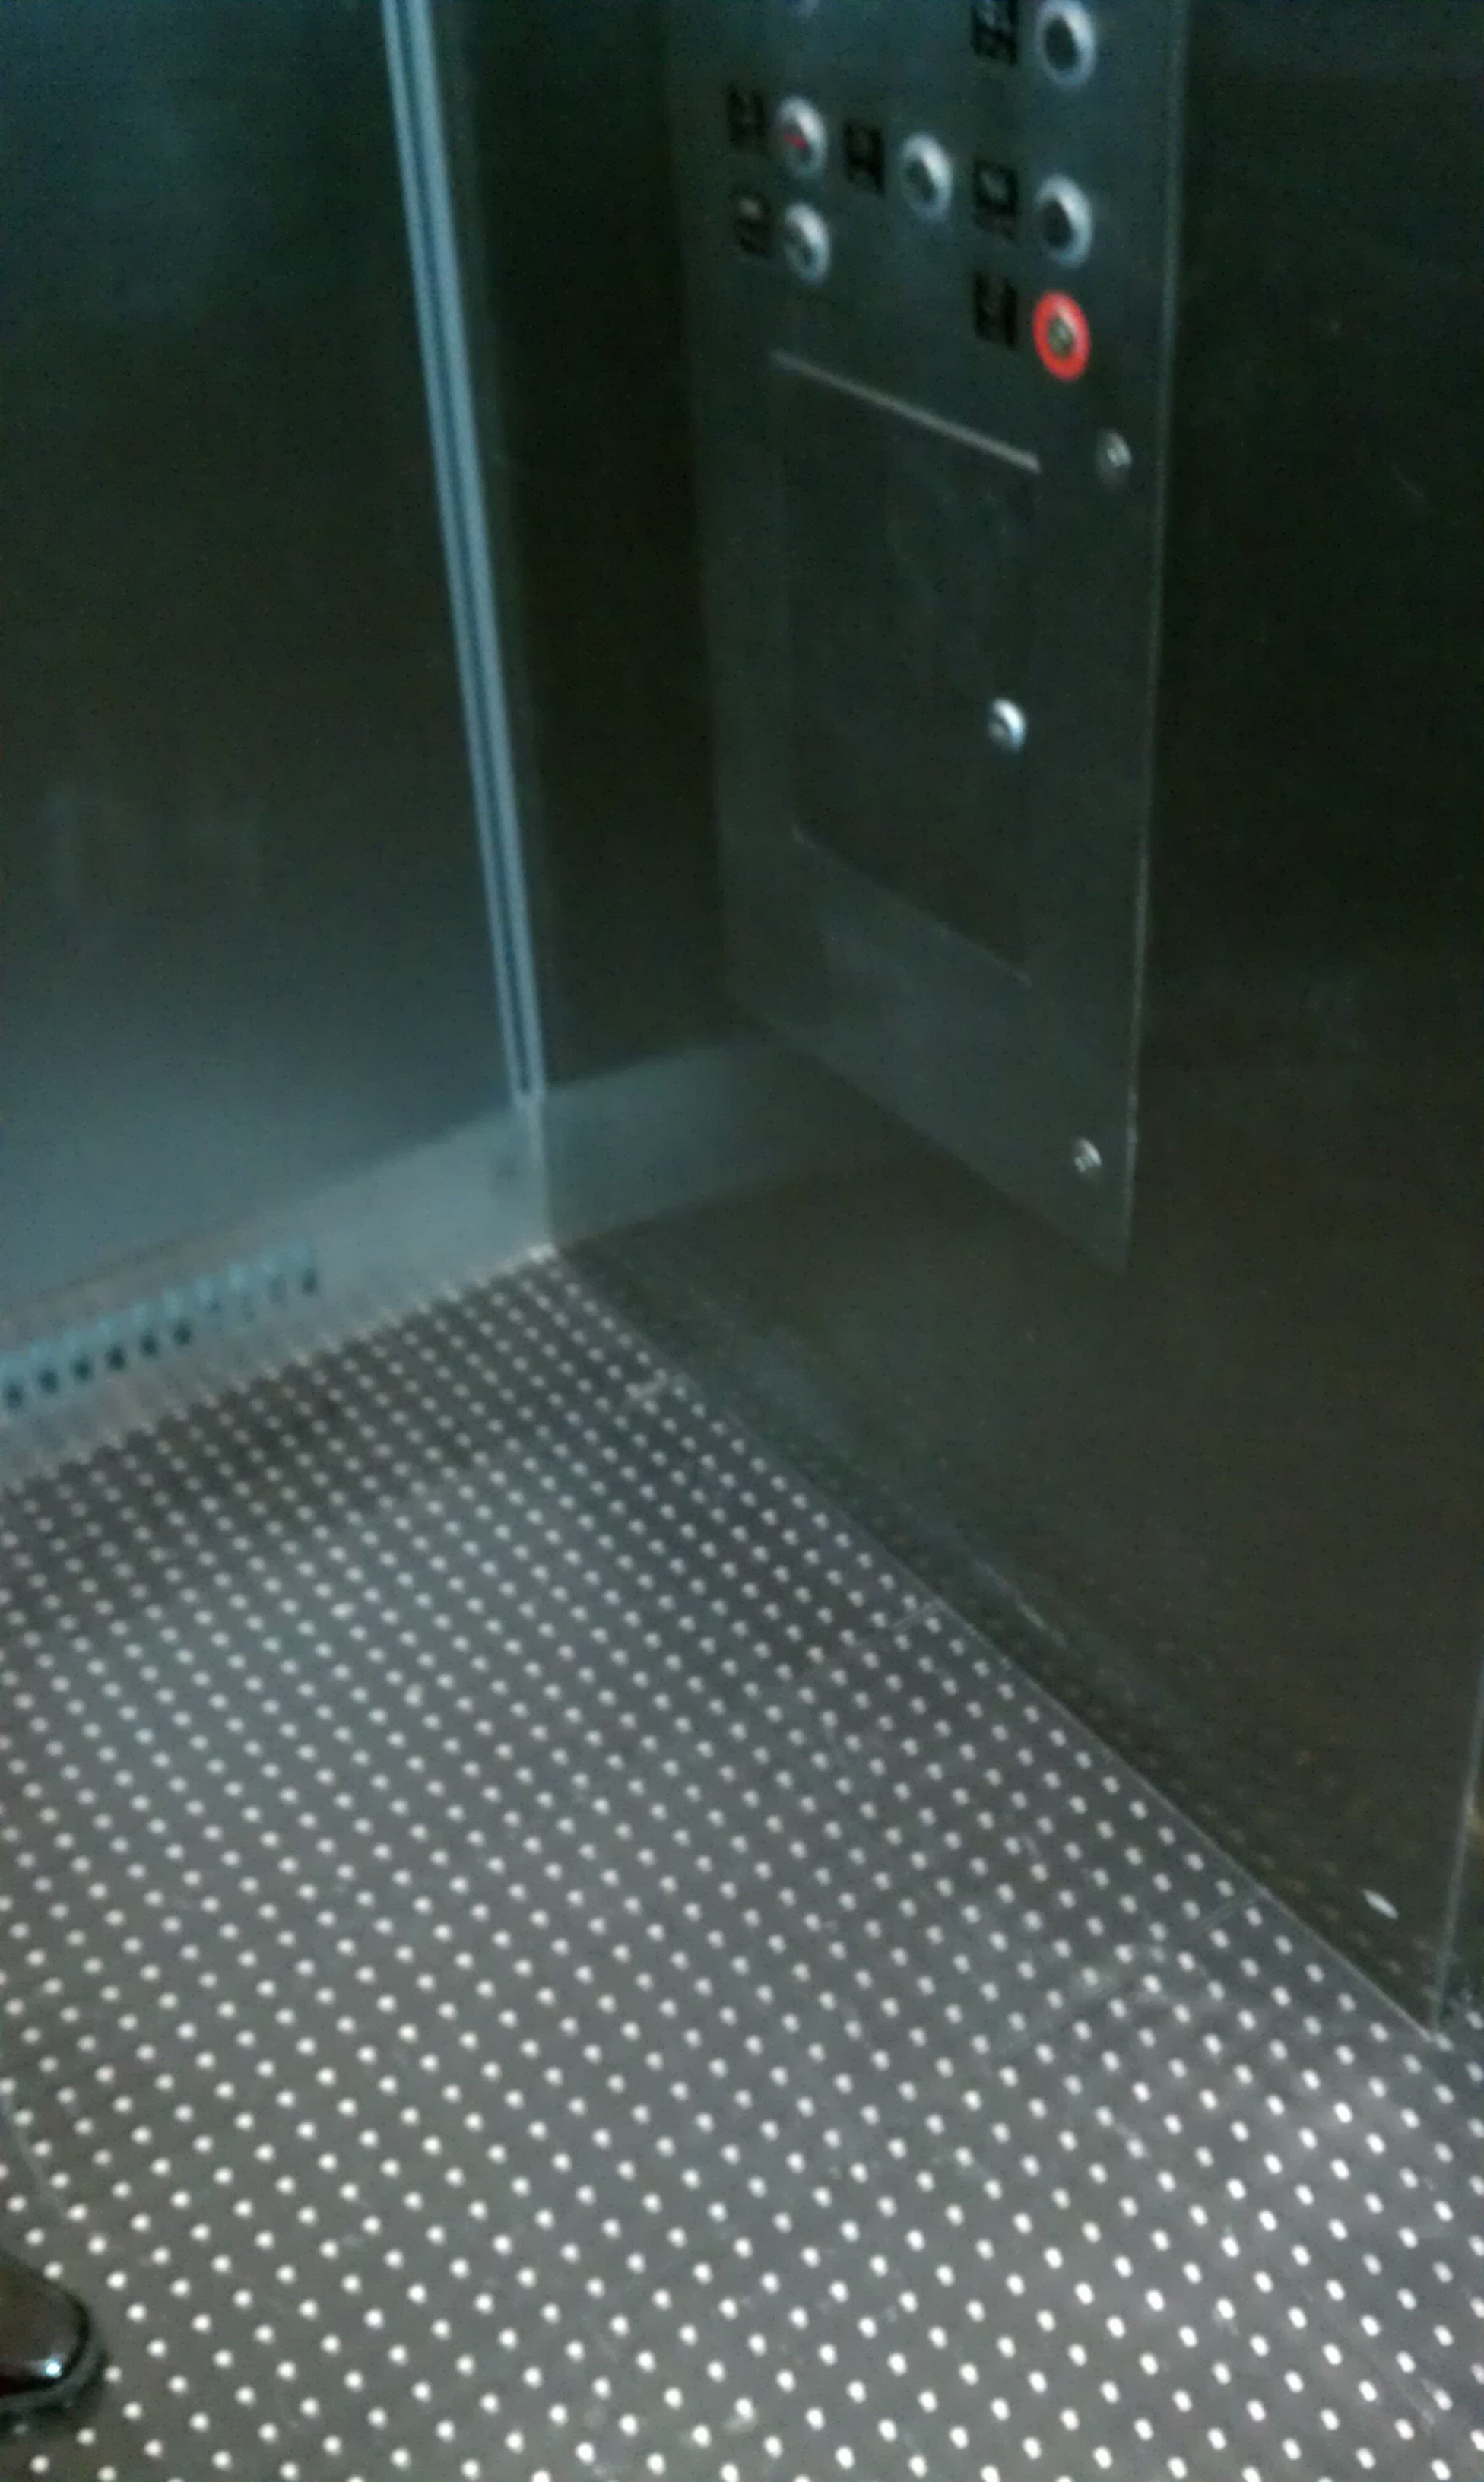 Stainless Steel Studded Rubber Tiles in Elevator